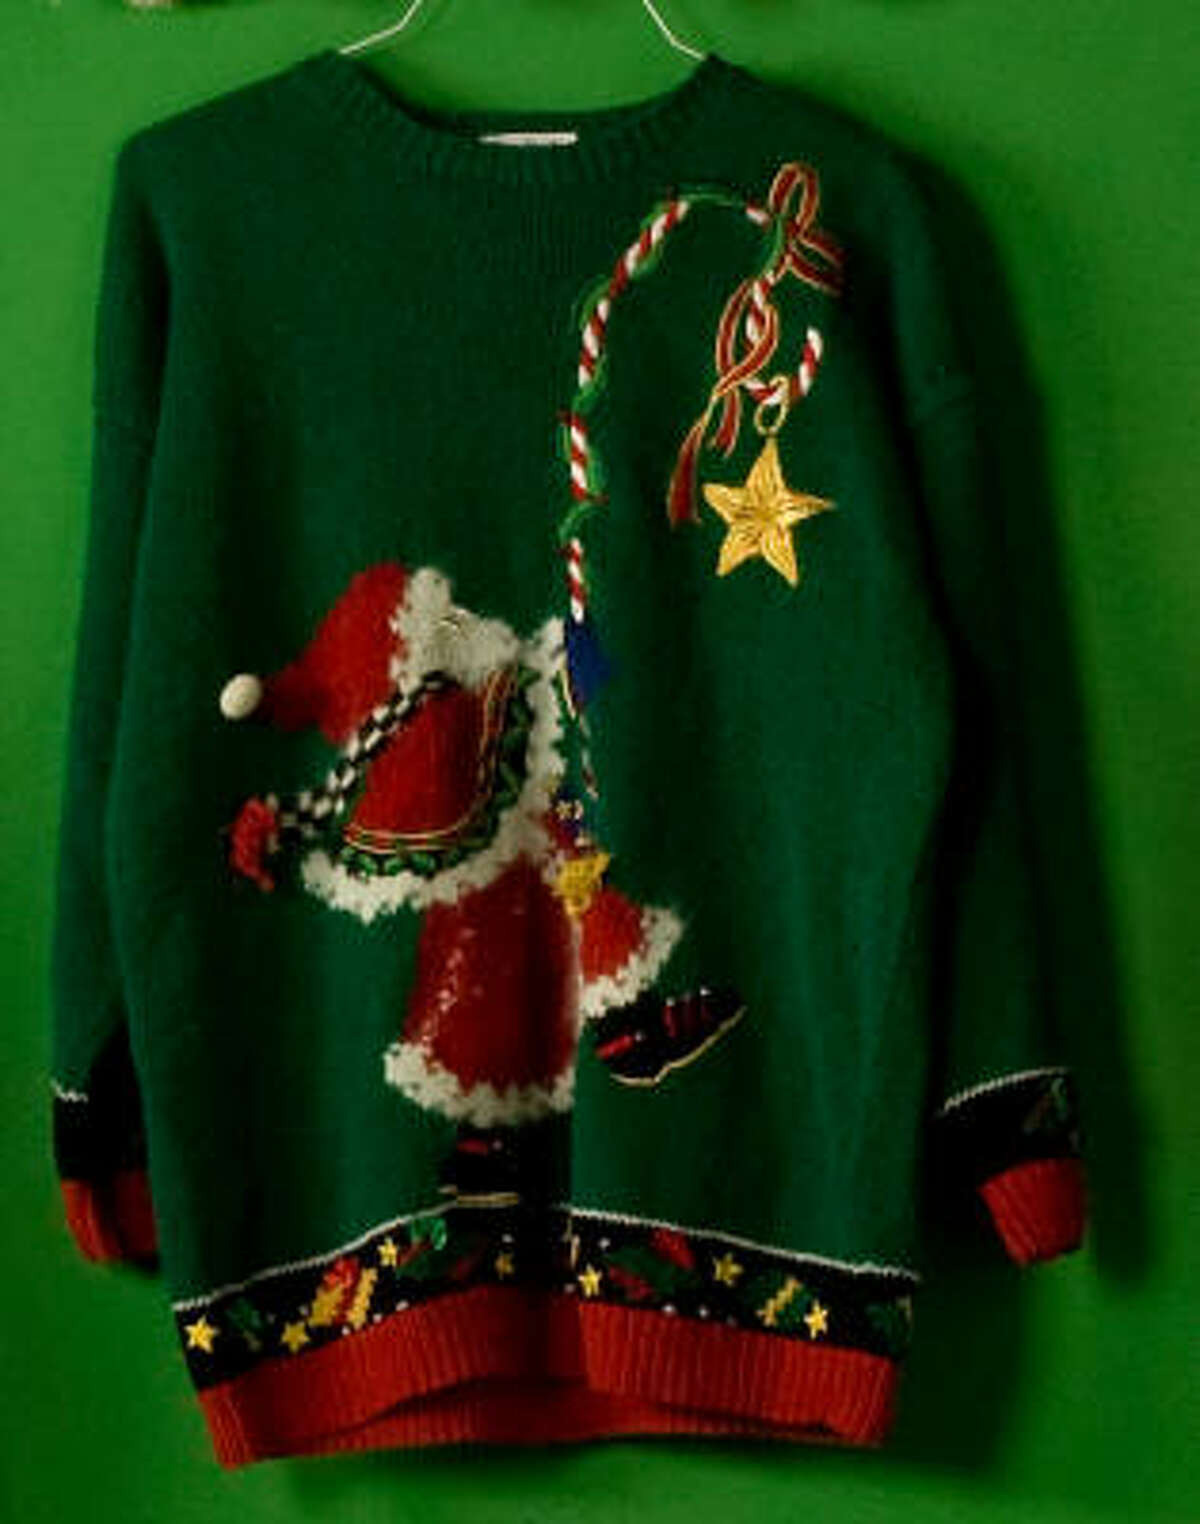 Tacky Christmas sweater store opens in Dallas